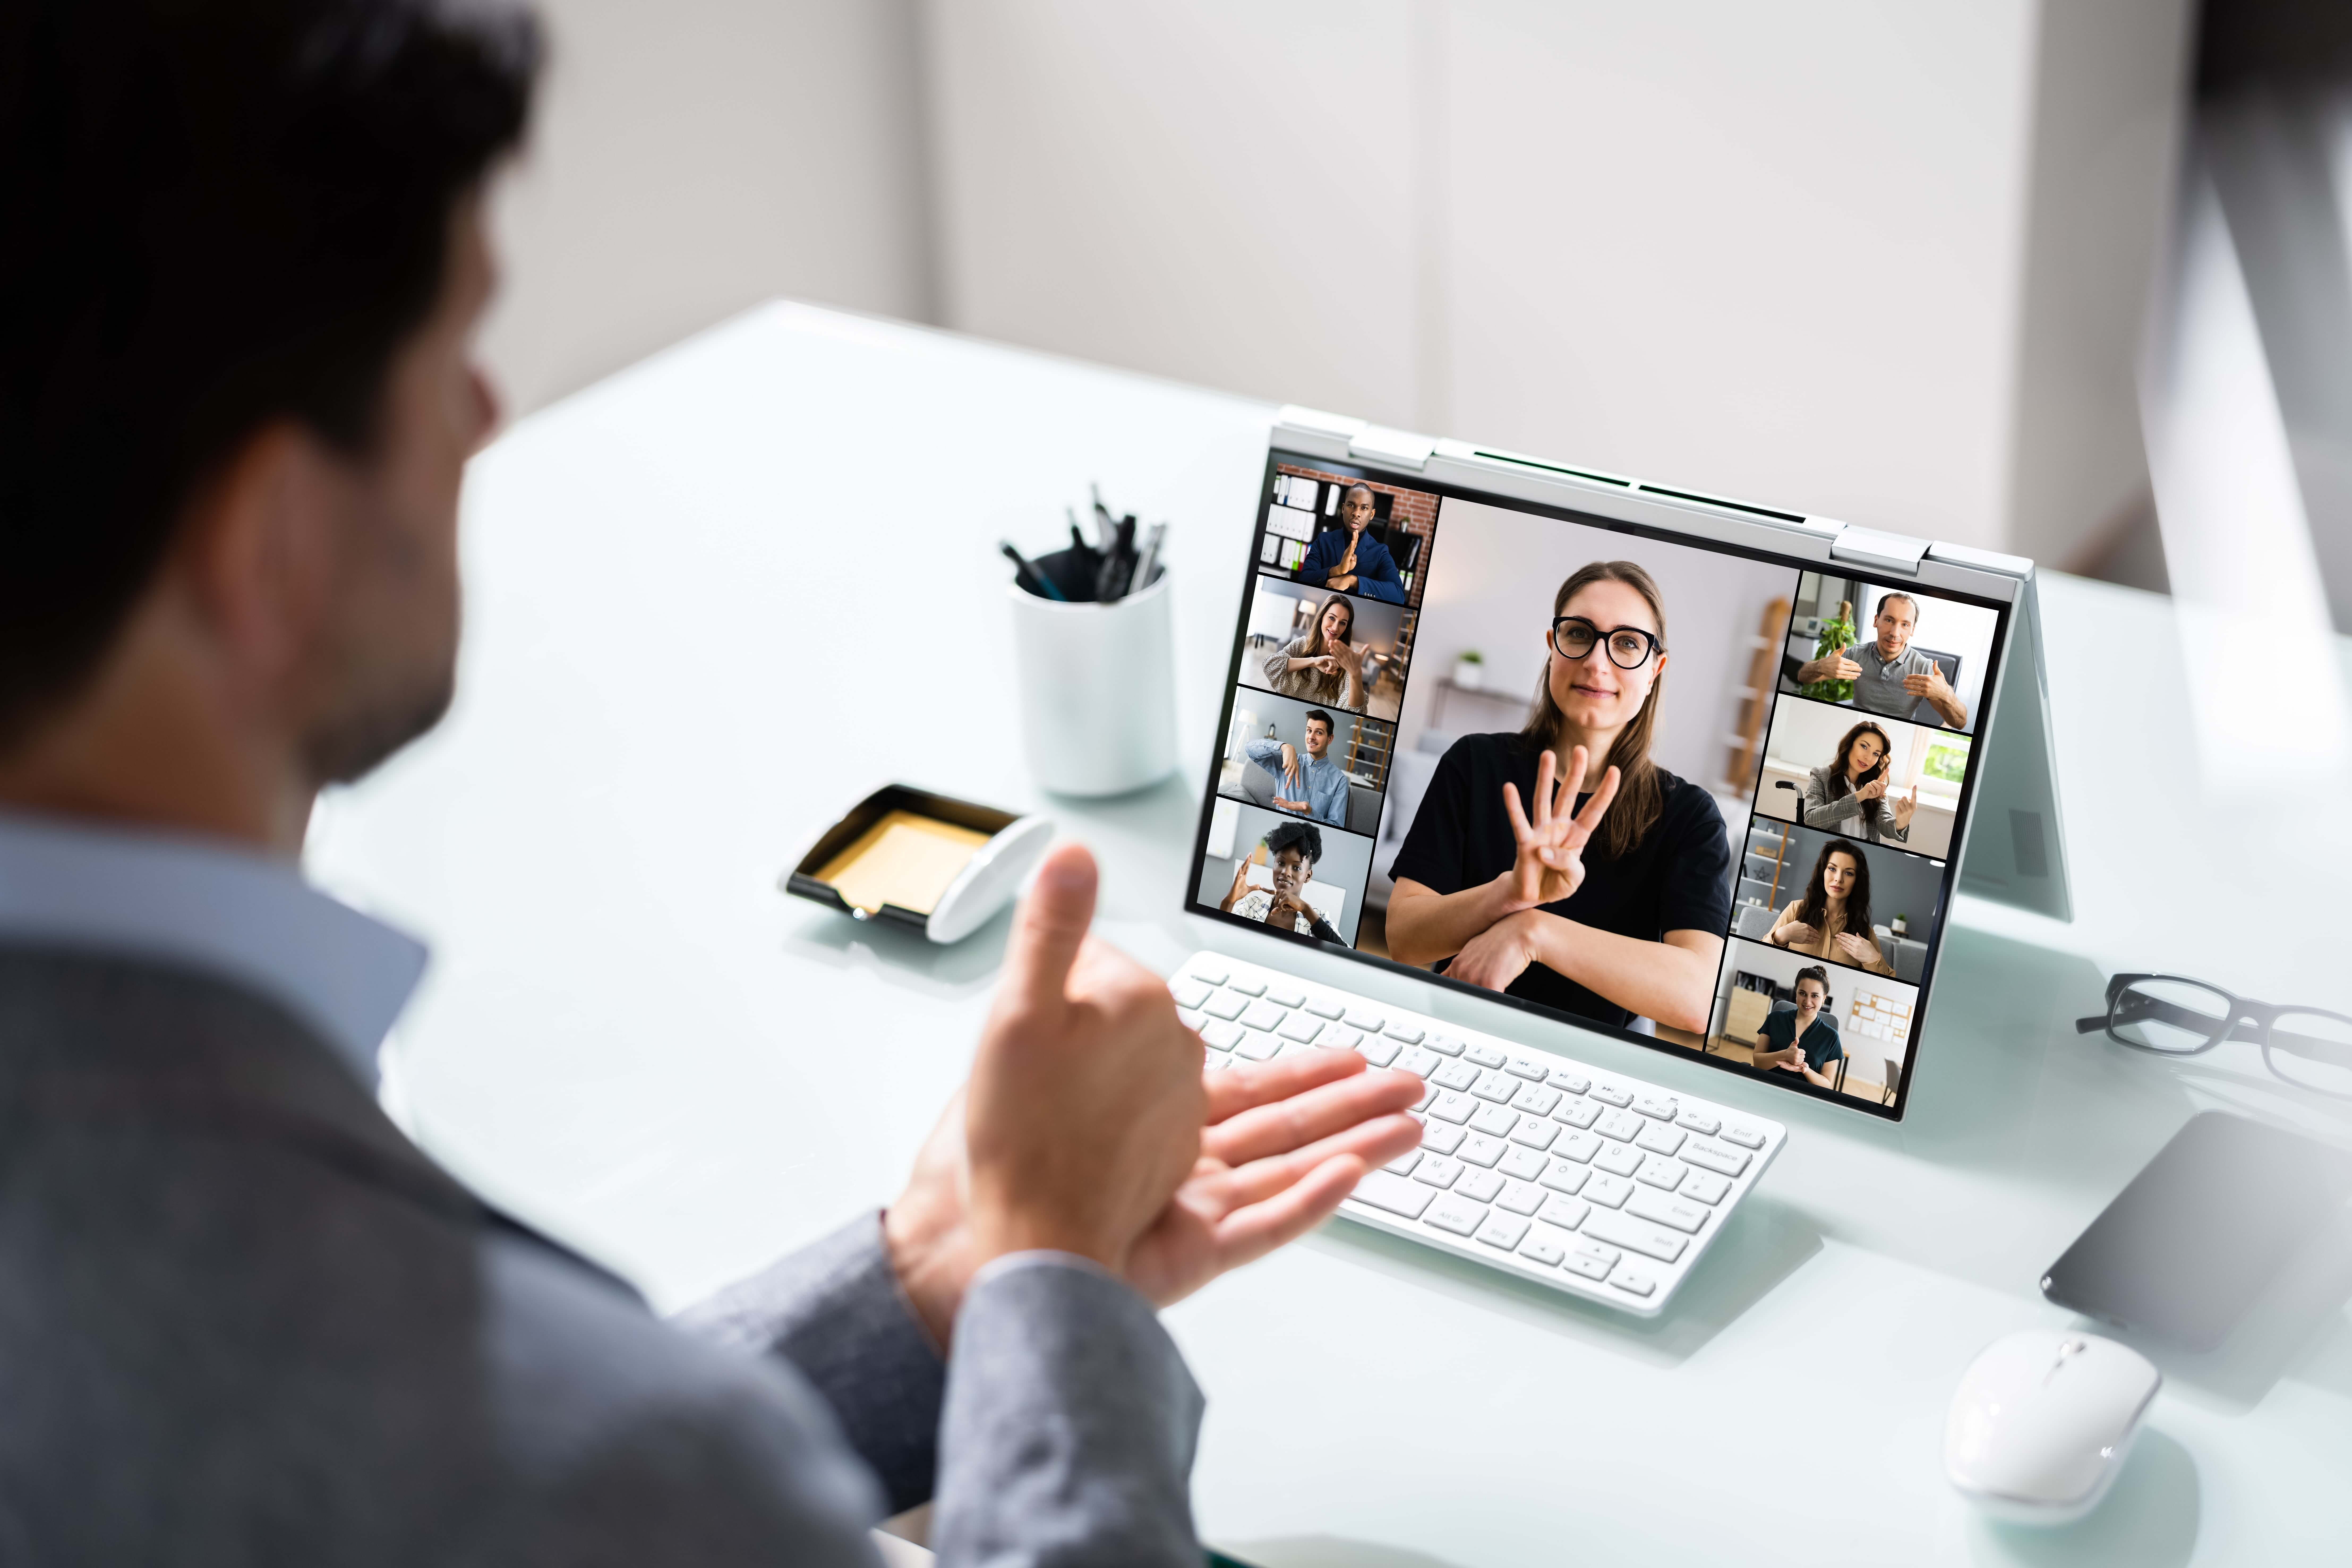 Man in front of a laptop using sign language on a video call.